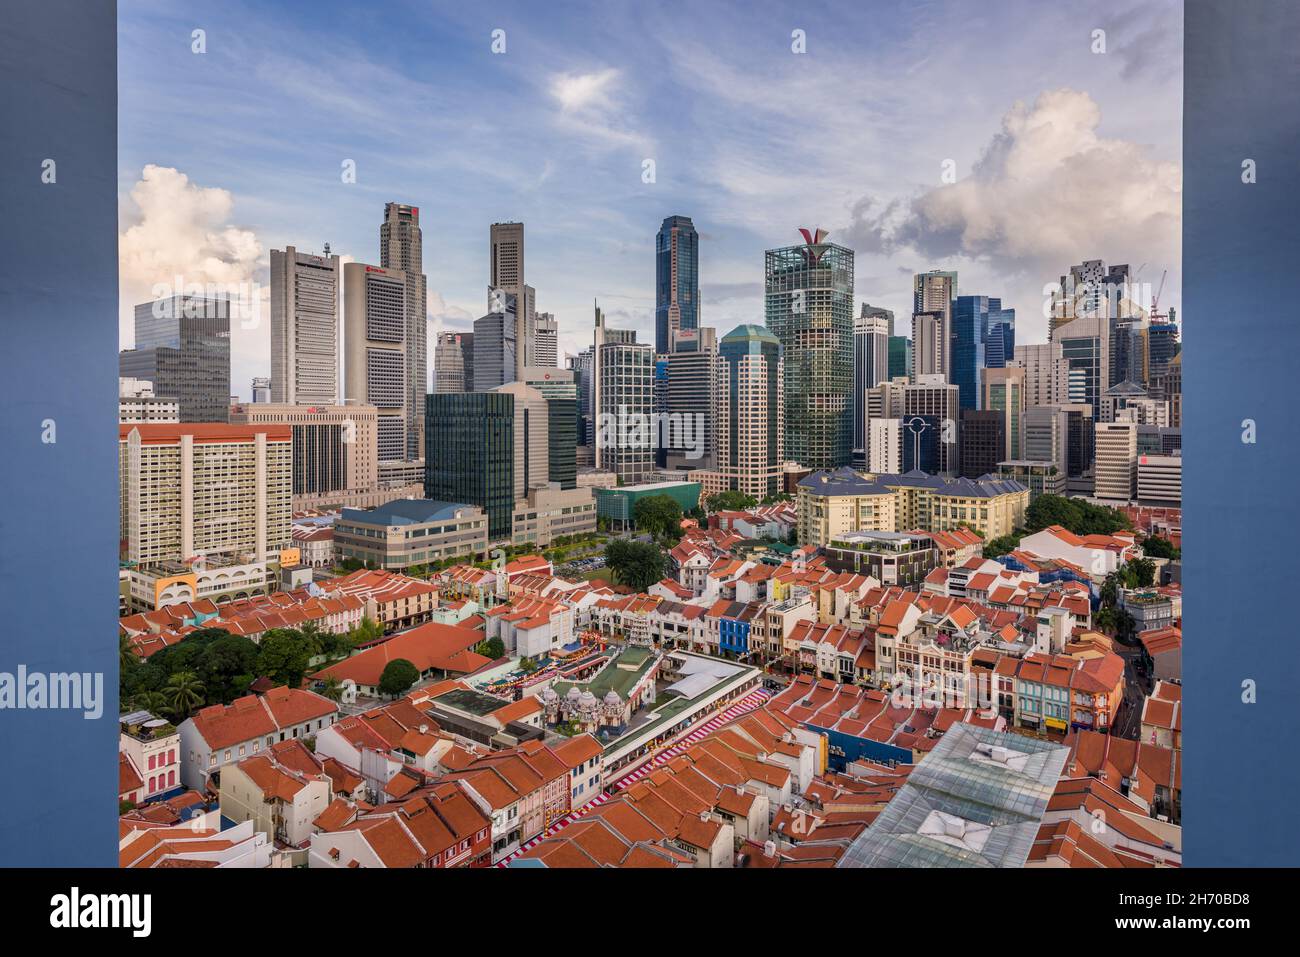 Singapore, 06 Feb 2016: Contrast of historical buildings and modern skyscrapers of the central business and financial district. Stock Photo